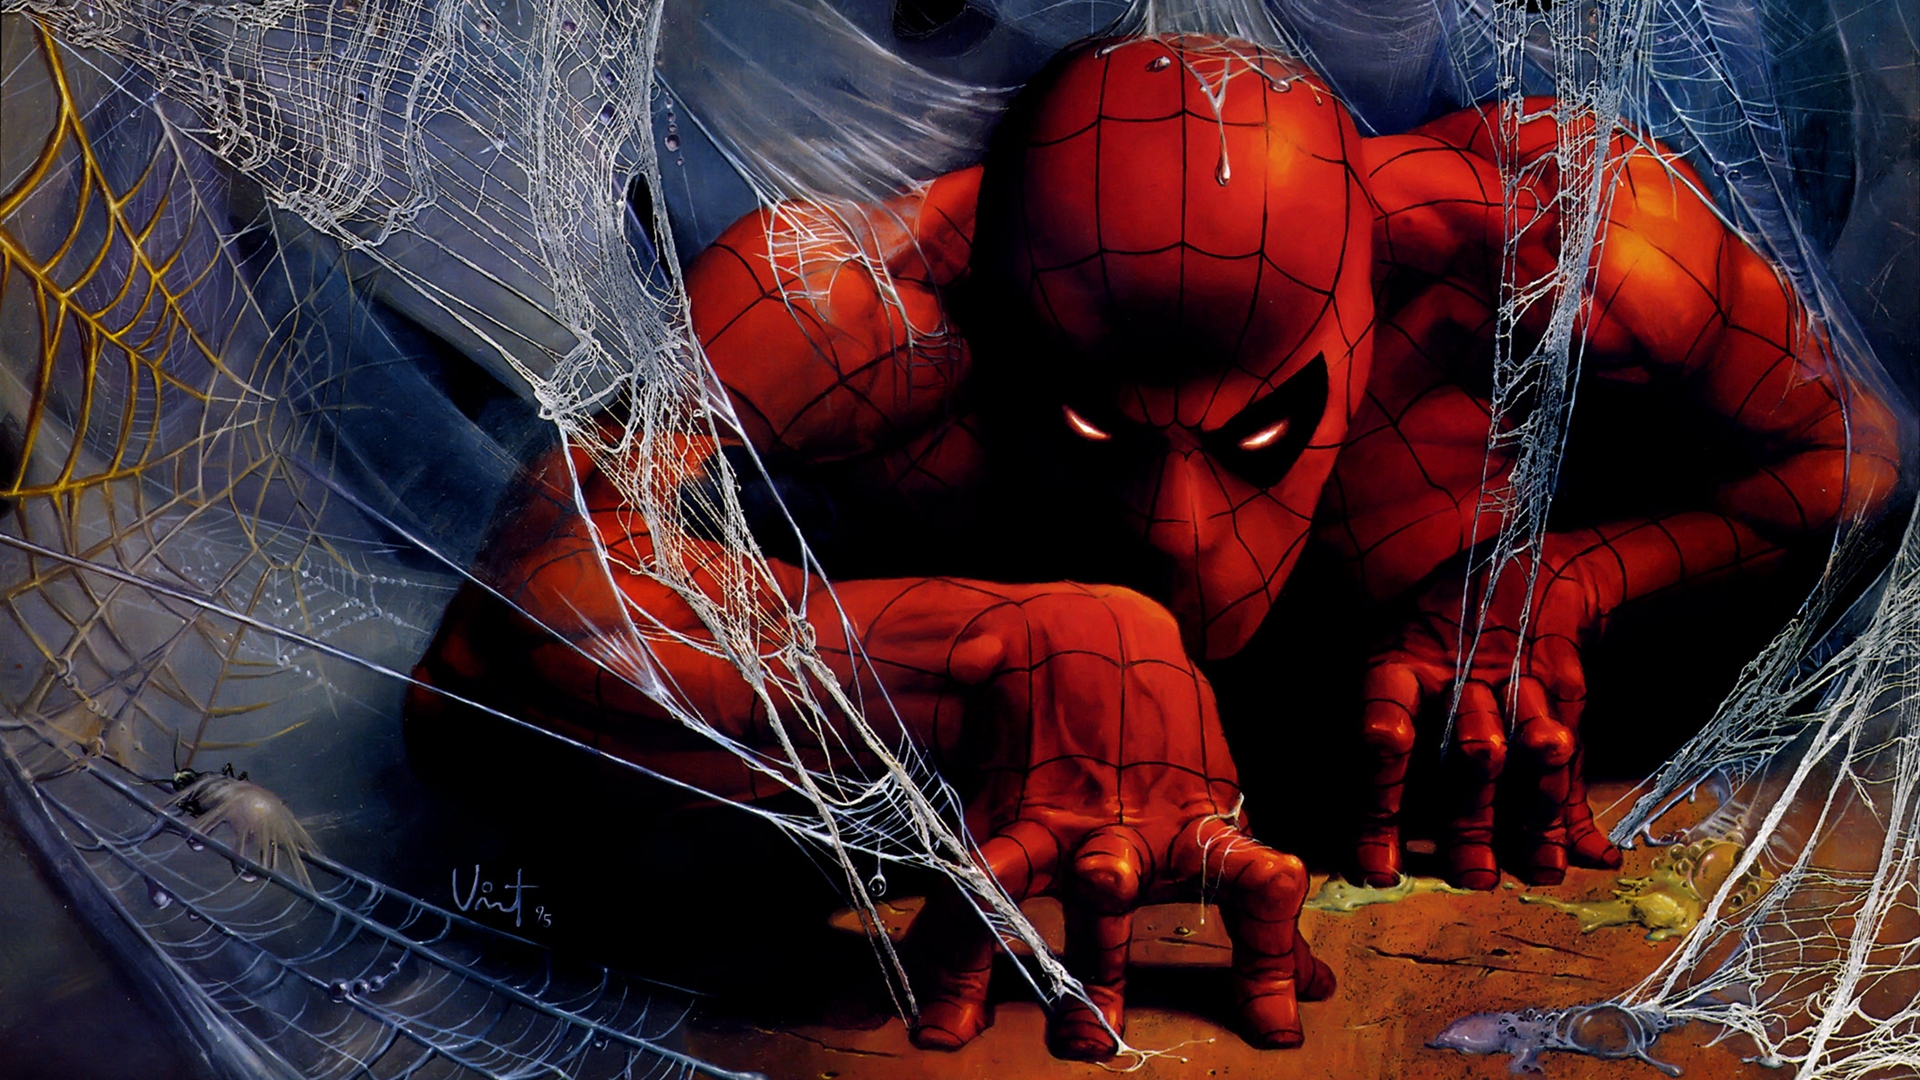 Spider man crawling towards you
with webs everywhere
